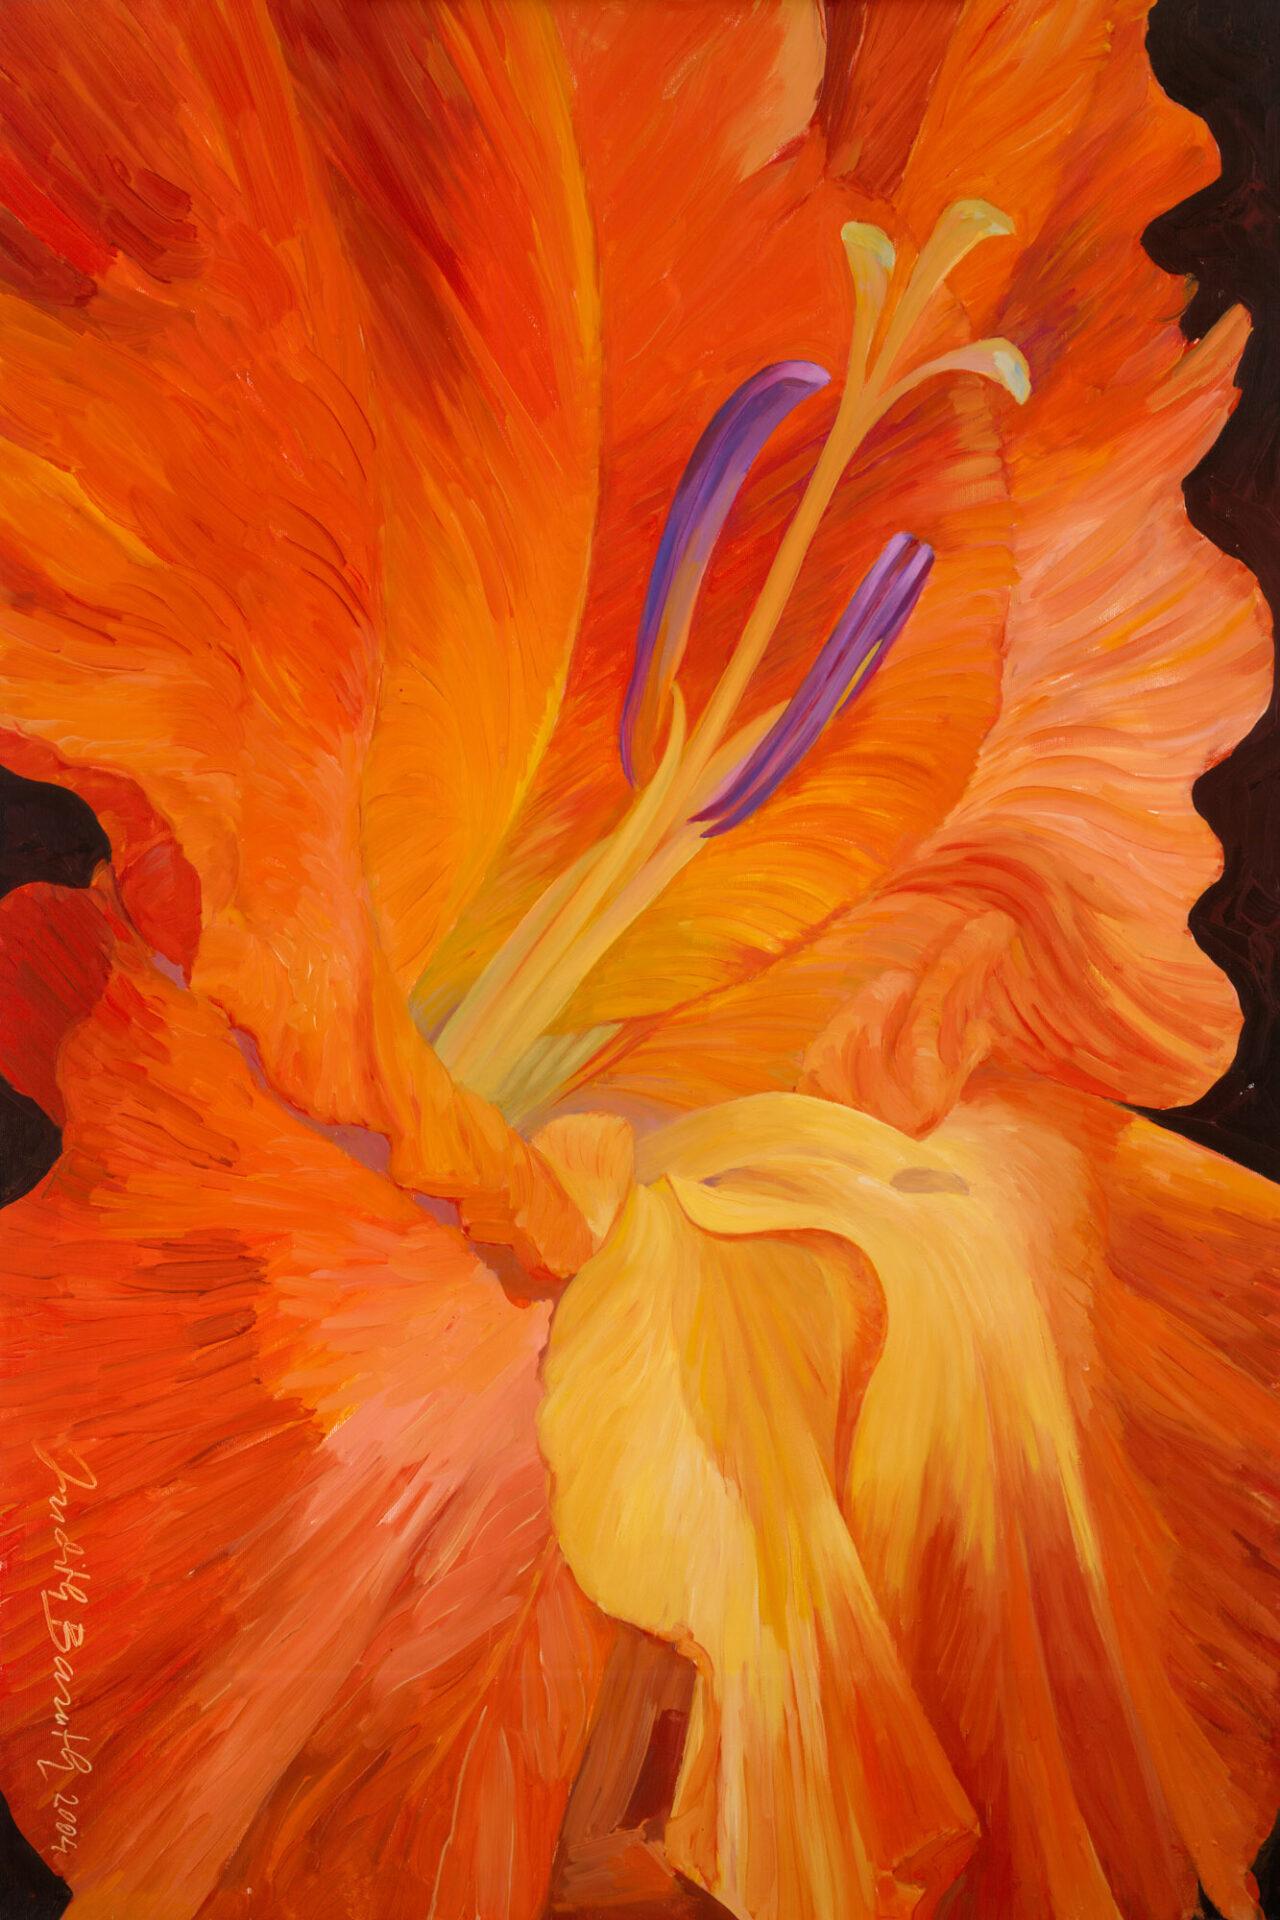 RED-HOT FLOWER - Painting by Judith Barath